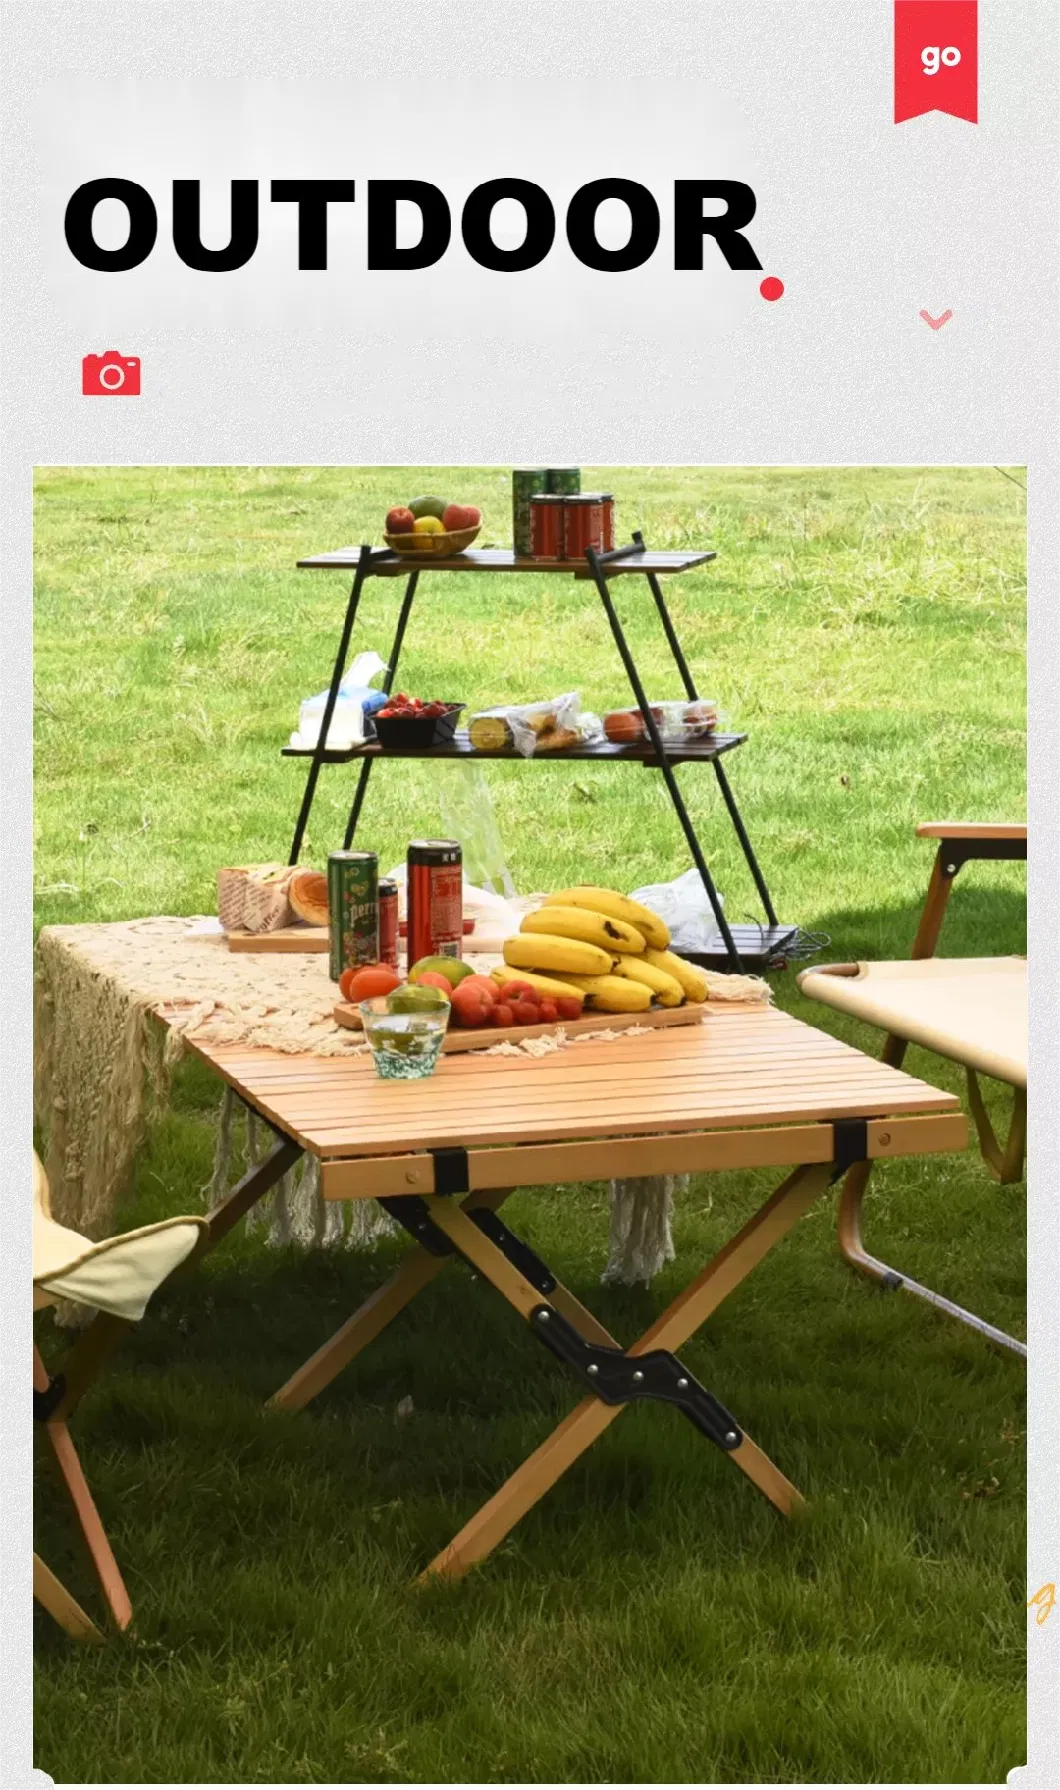 BBQ Portable Folding Roll Top Wood Camping Table